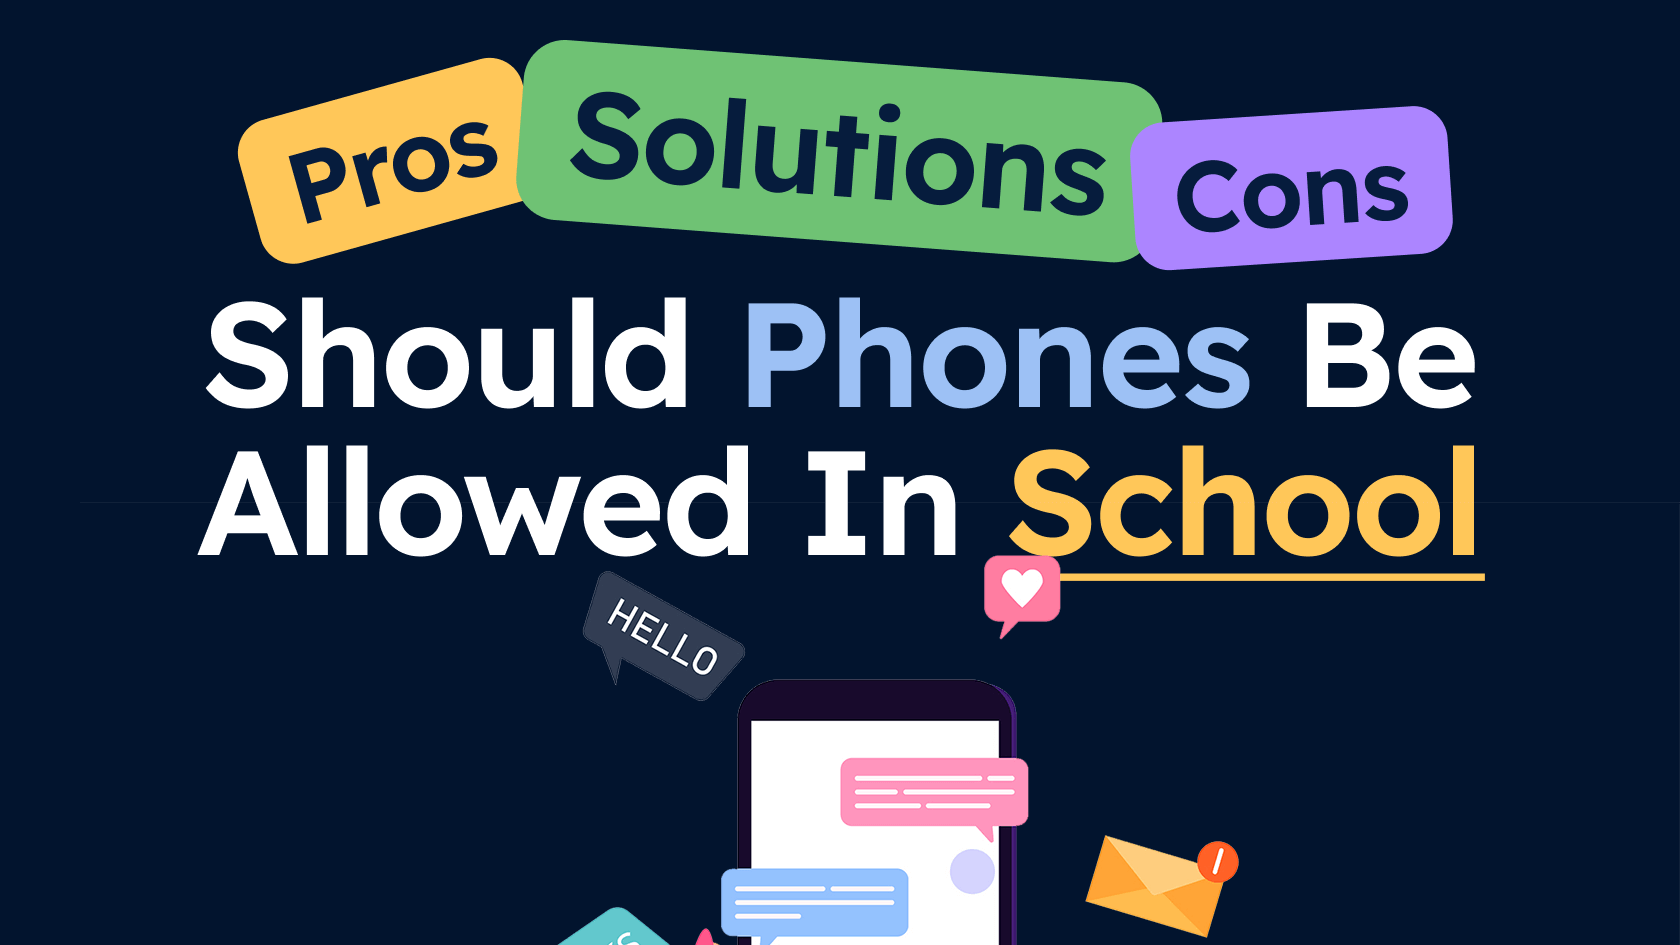 Pros and Cons of caring for the phone at school